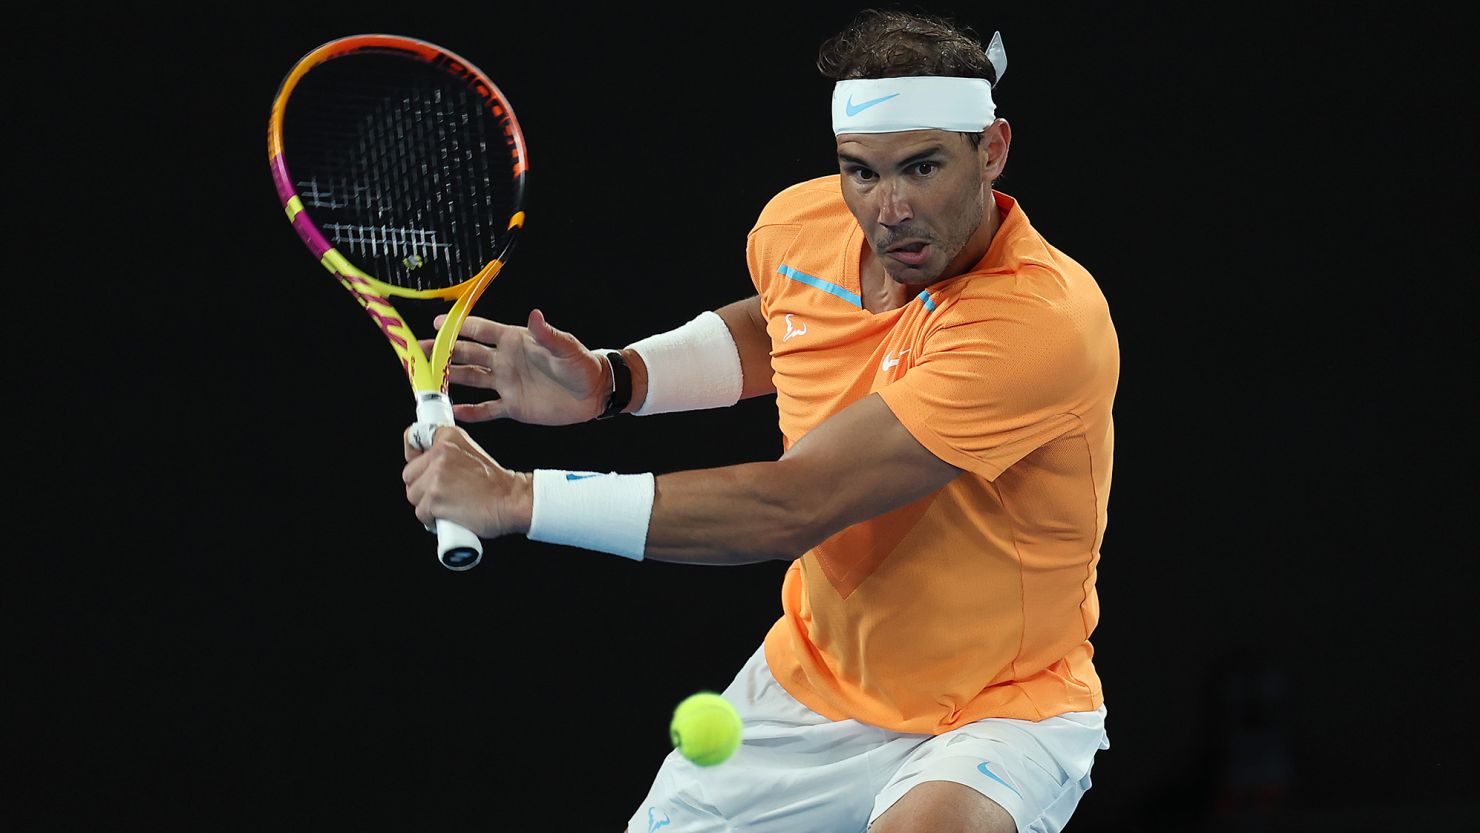 MELBOURNE, AUSTRALIA - JANUARY 18: Rafael Nadal of Spain plays a backhand in their round two singles match against Mackenzie McDonald of the United States during day three of the 2023 Australian Open at Melbourne Park on January 18, 2023 in Melbourne, Australia. (Photo by Cameron Spencer/Getty Images)